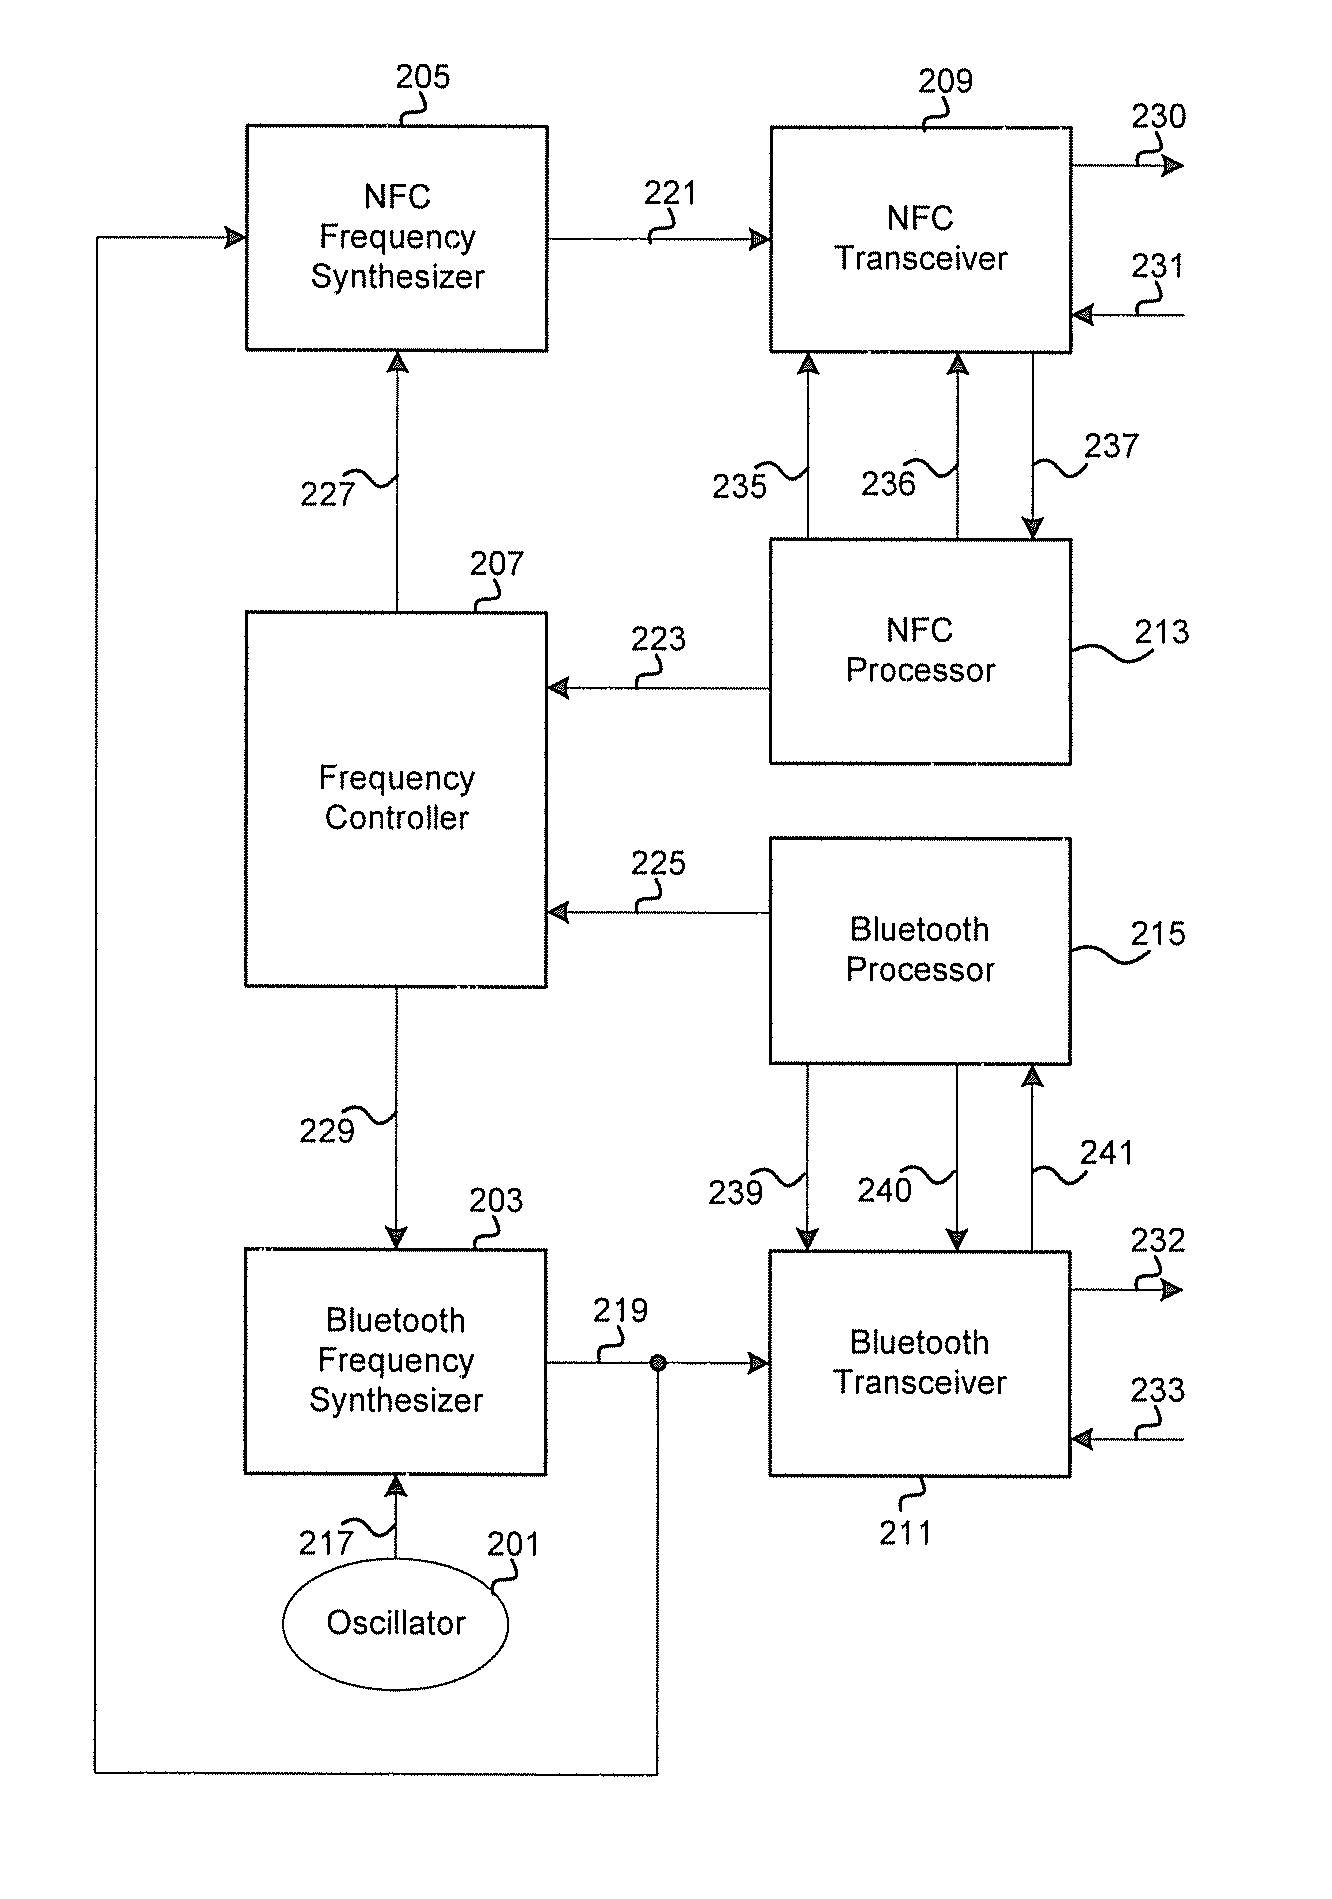 Method and system for a transceiver for bluetooth and near field communication (NFC)